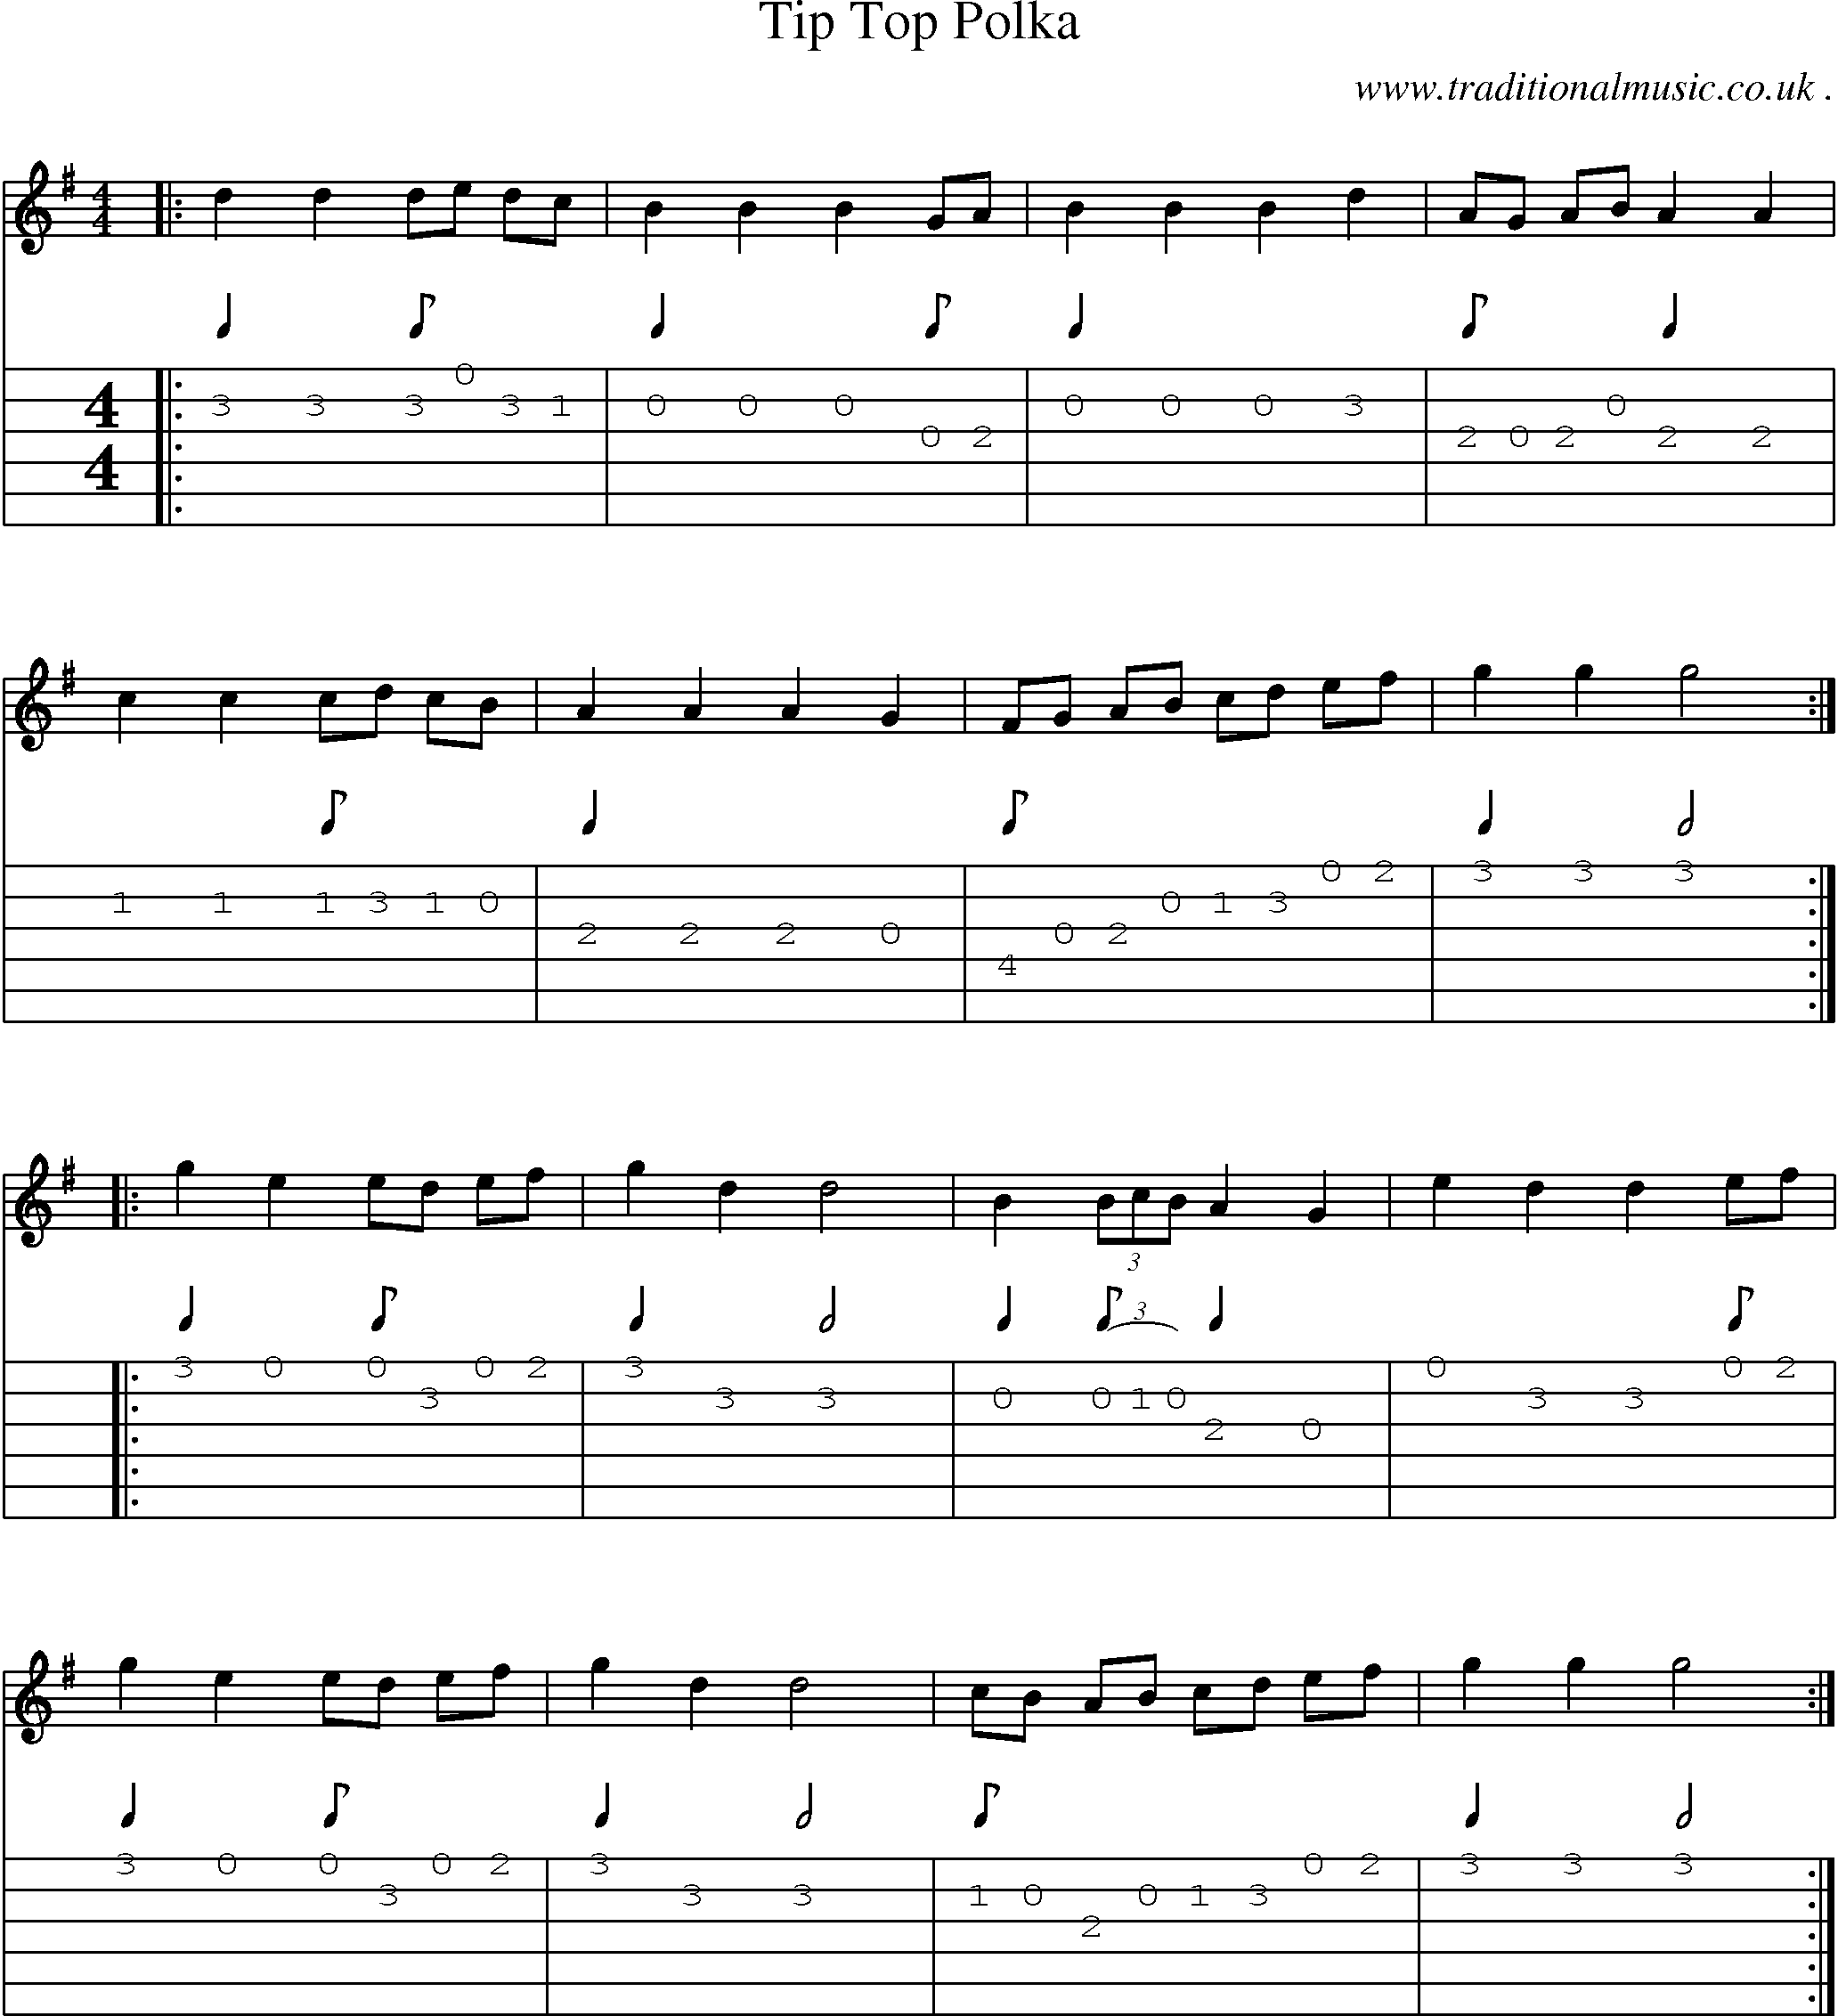 Sheet-Music and Guitar Tabs for Tip Top Polka